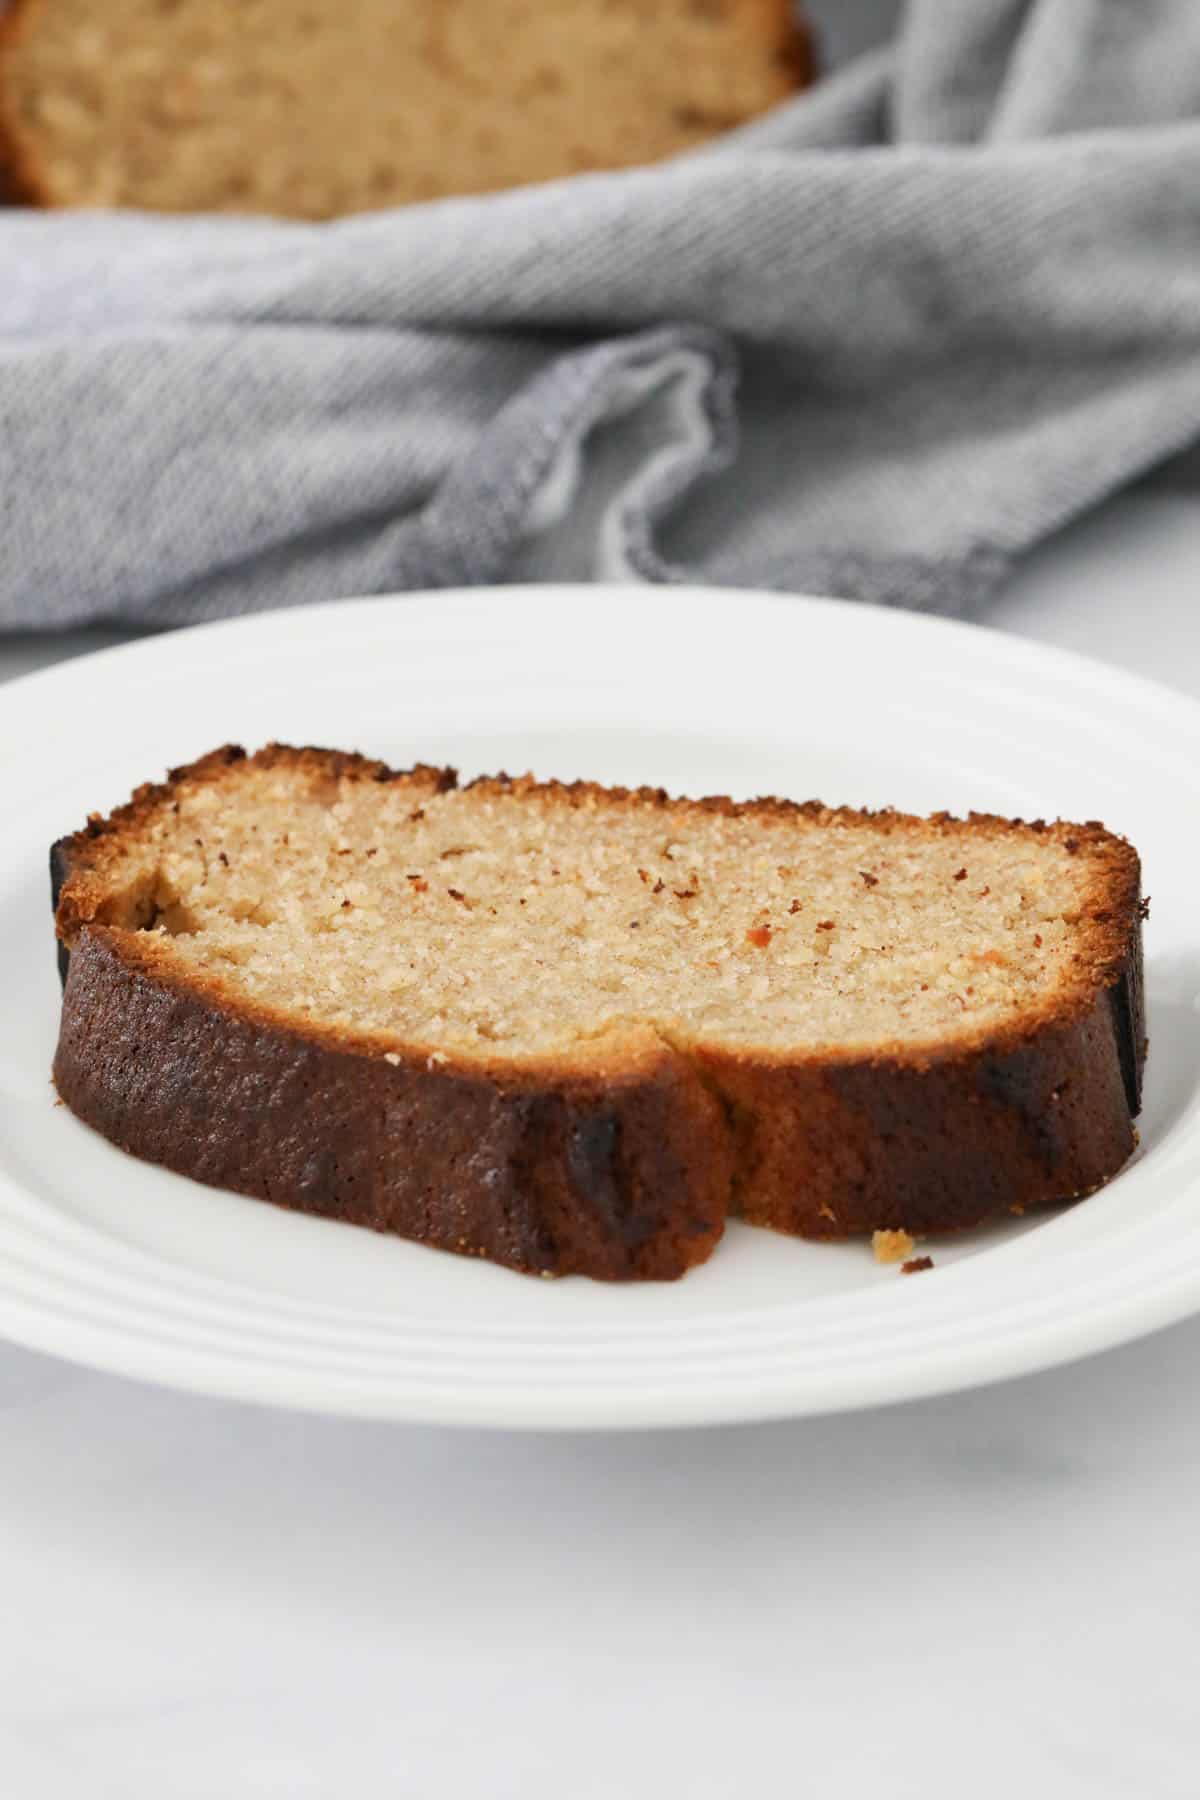 A slice of banana bread on a plate.